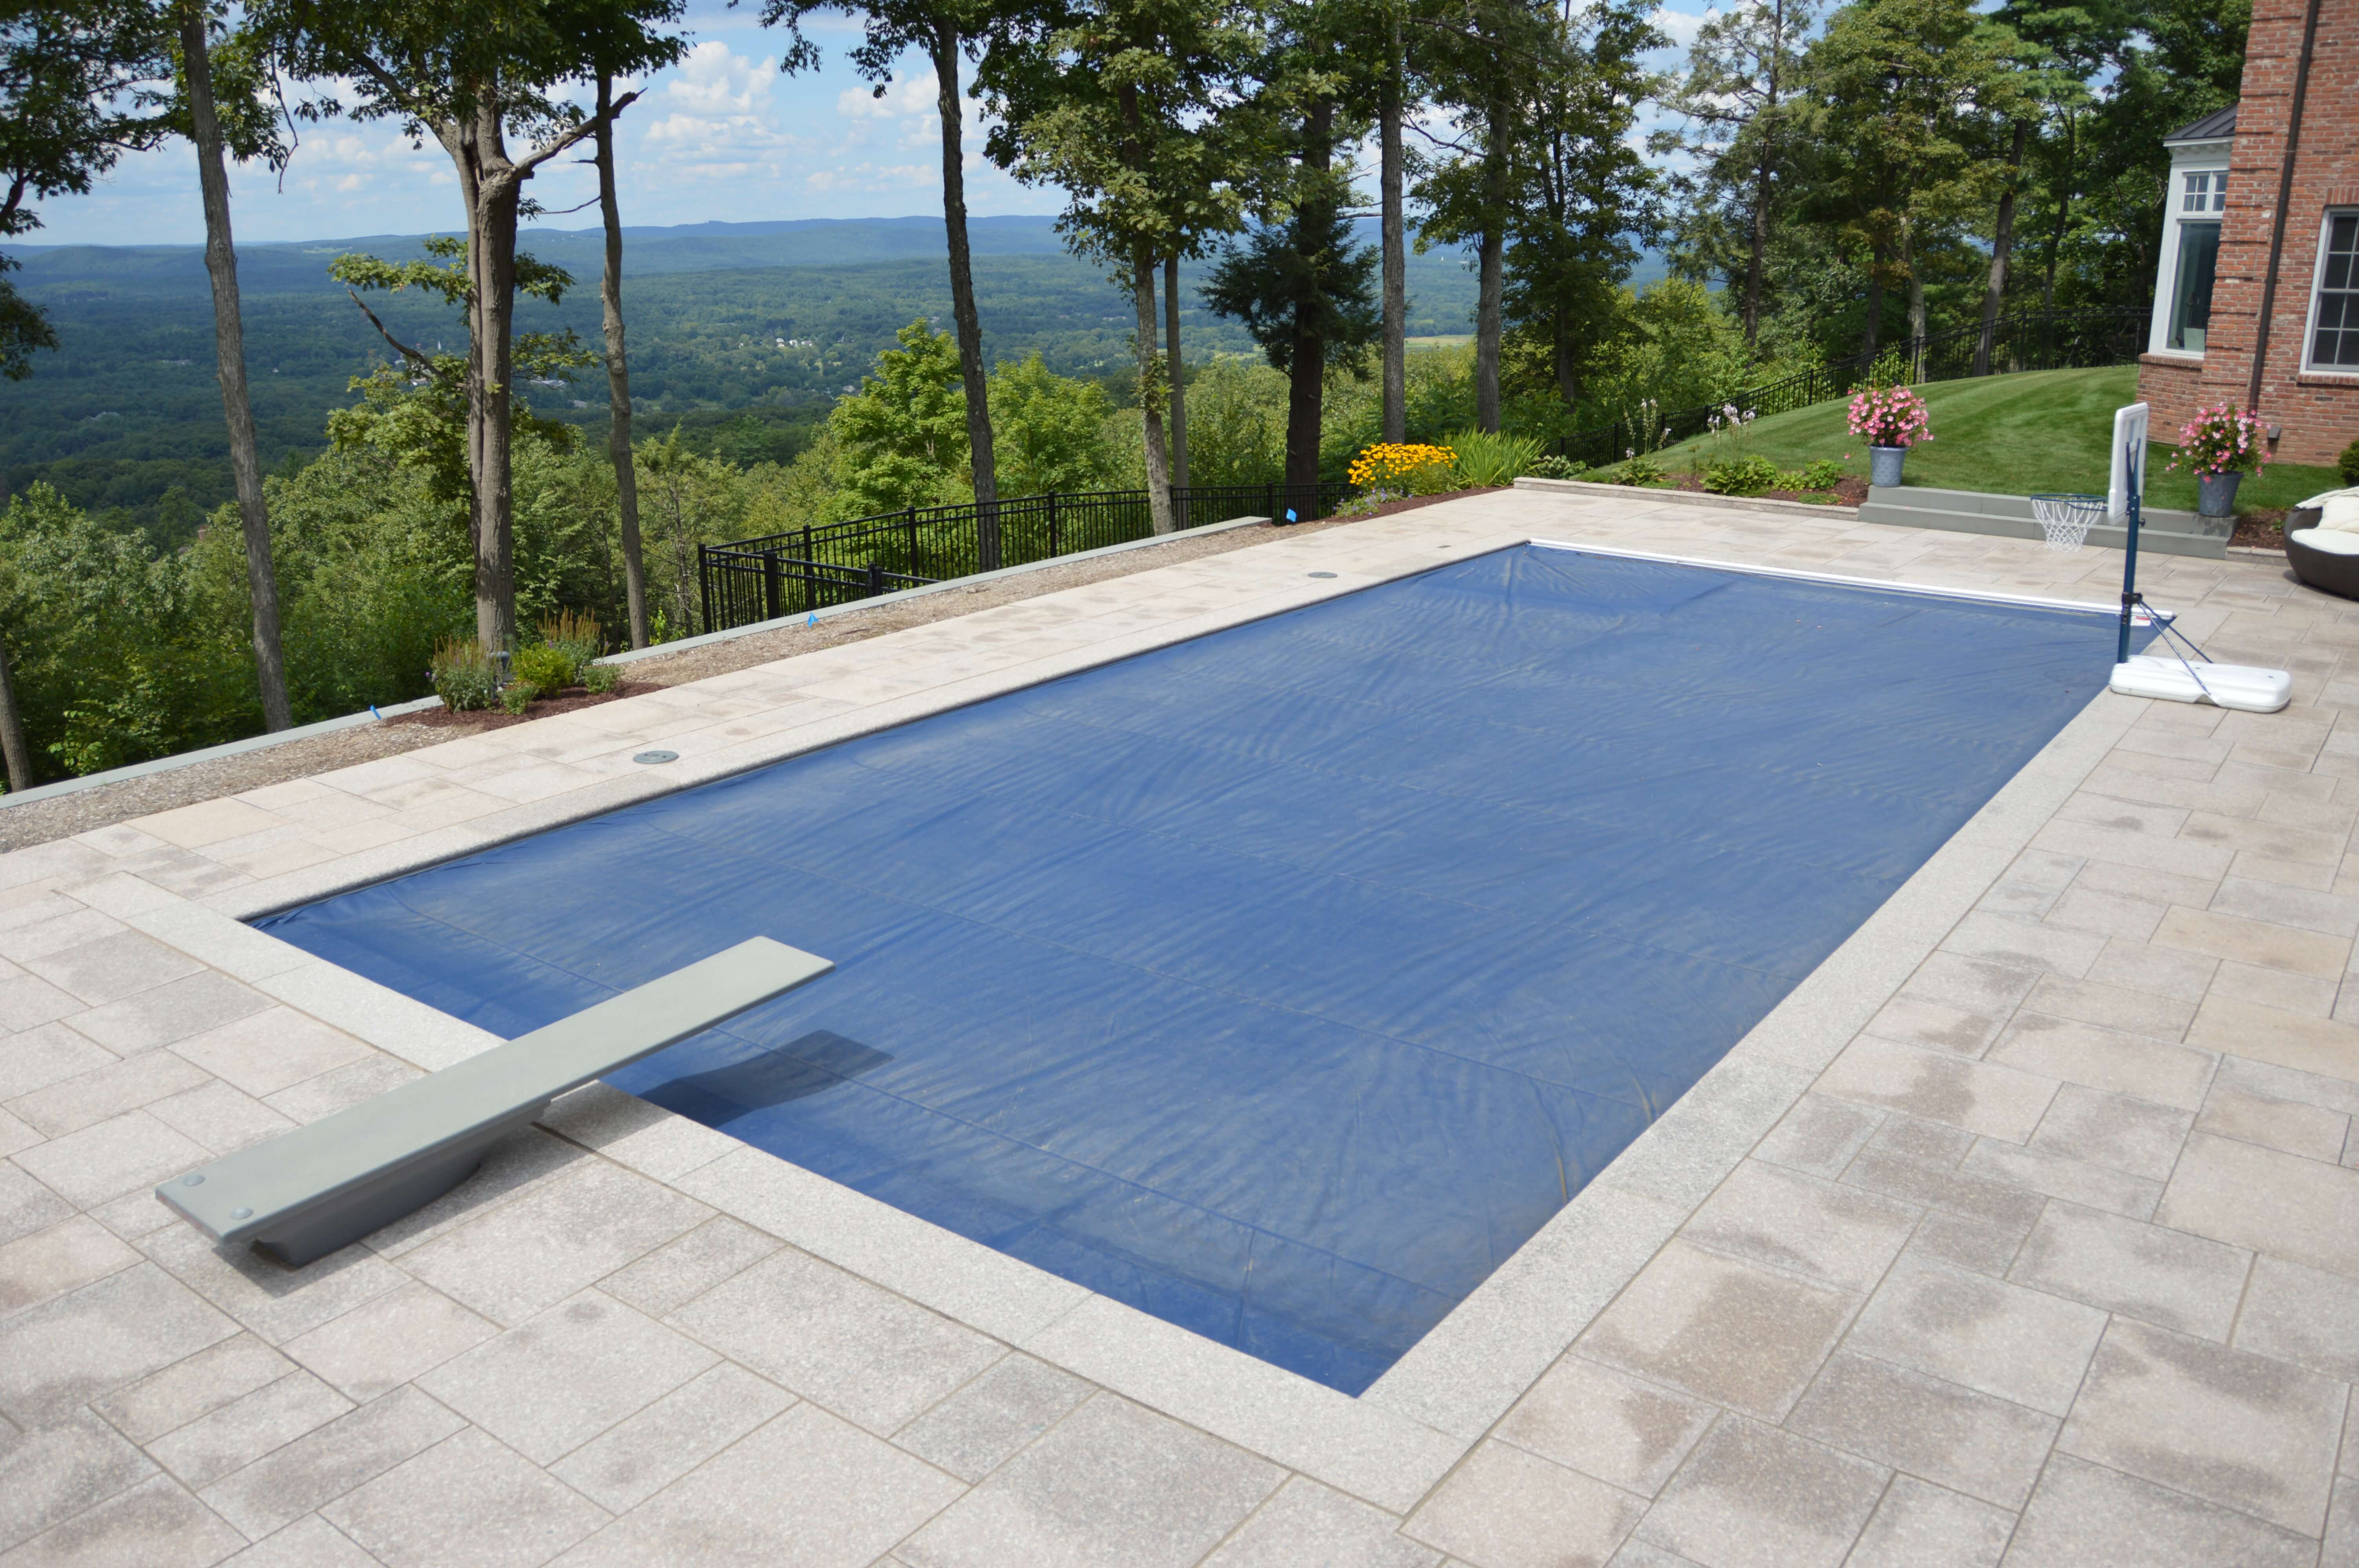 The Ultimate Guide to Choosing the Best Pool Cover - GGR Home Inspections